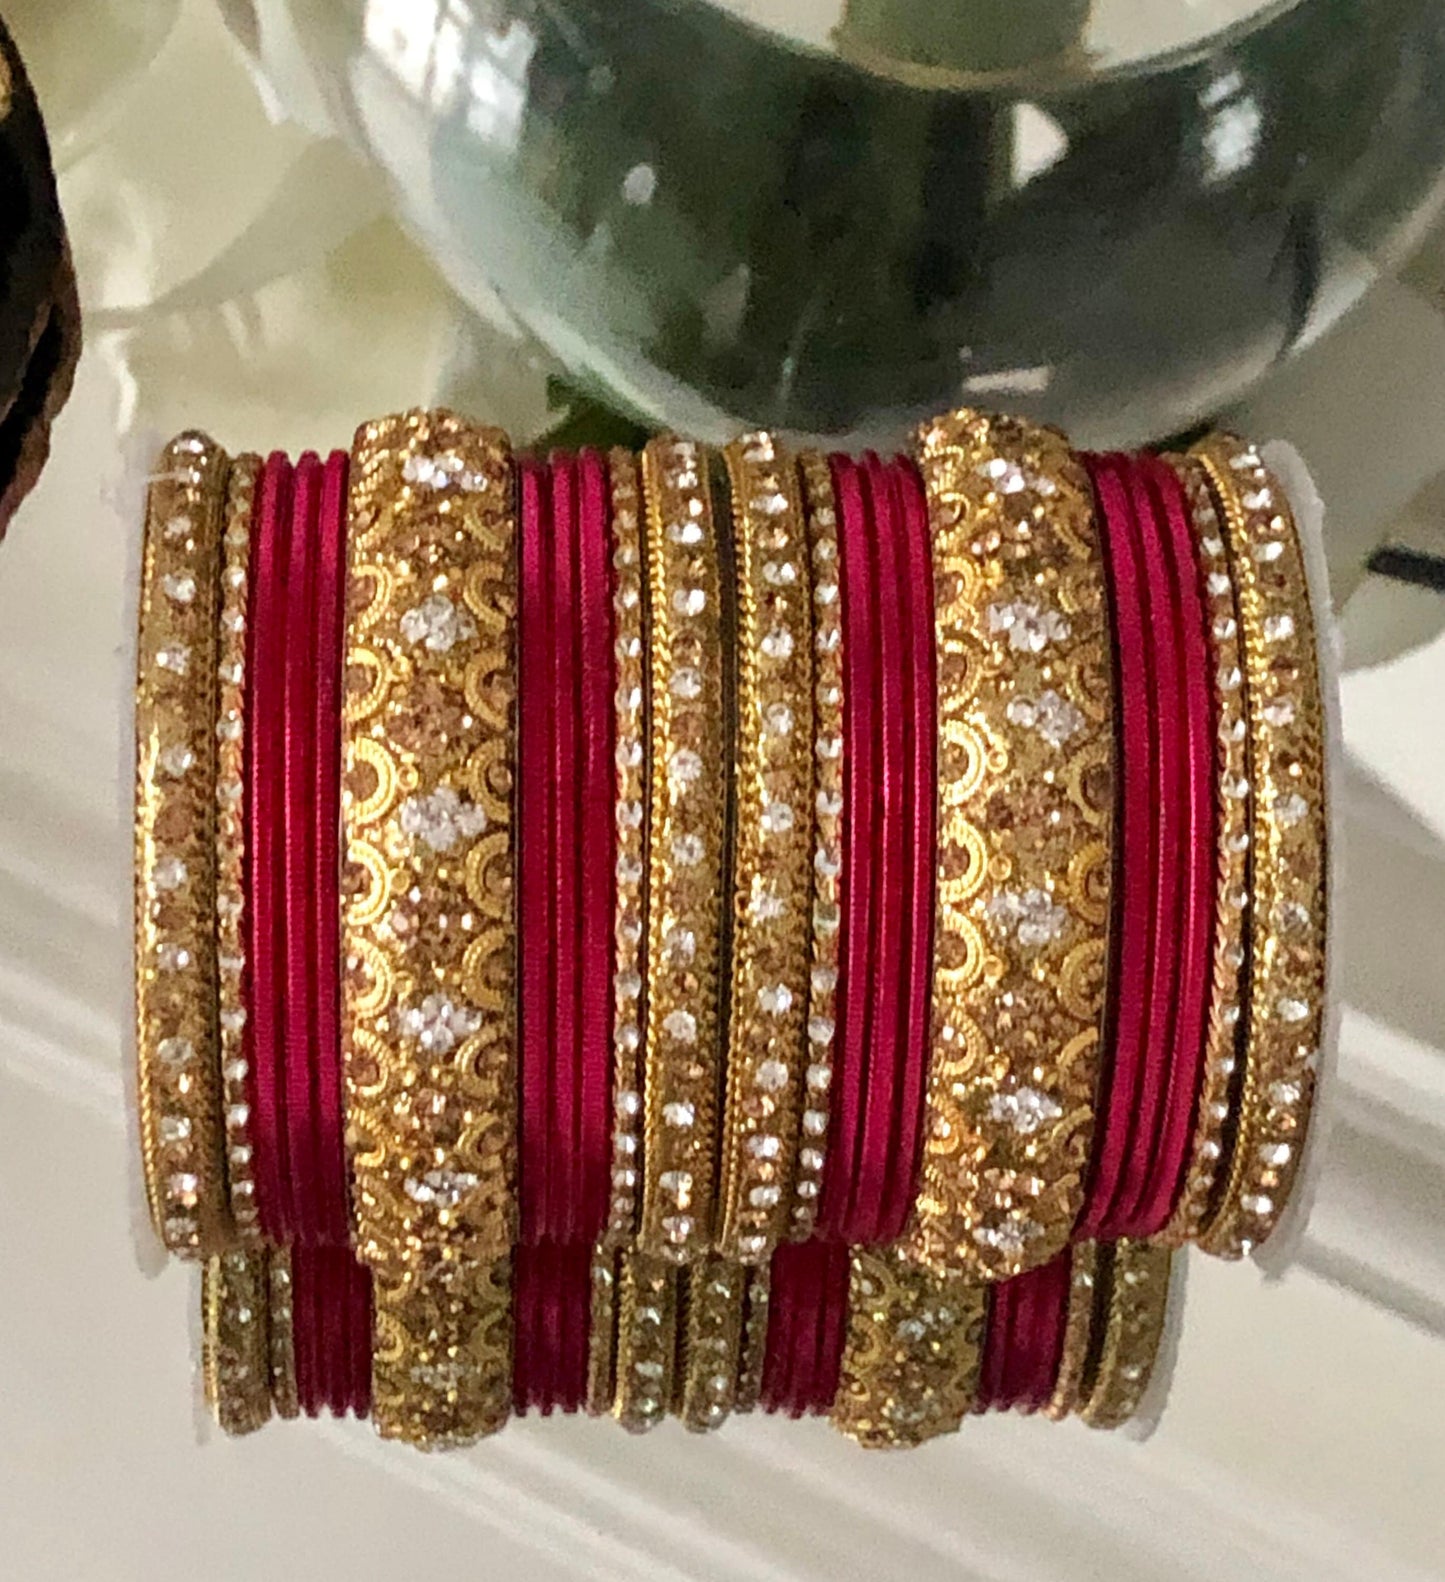 Indian Jewellery Bangles Stack Jewellery Metal Broad Kangan Perfect for Eid |Budget Collection|